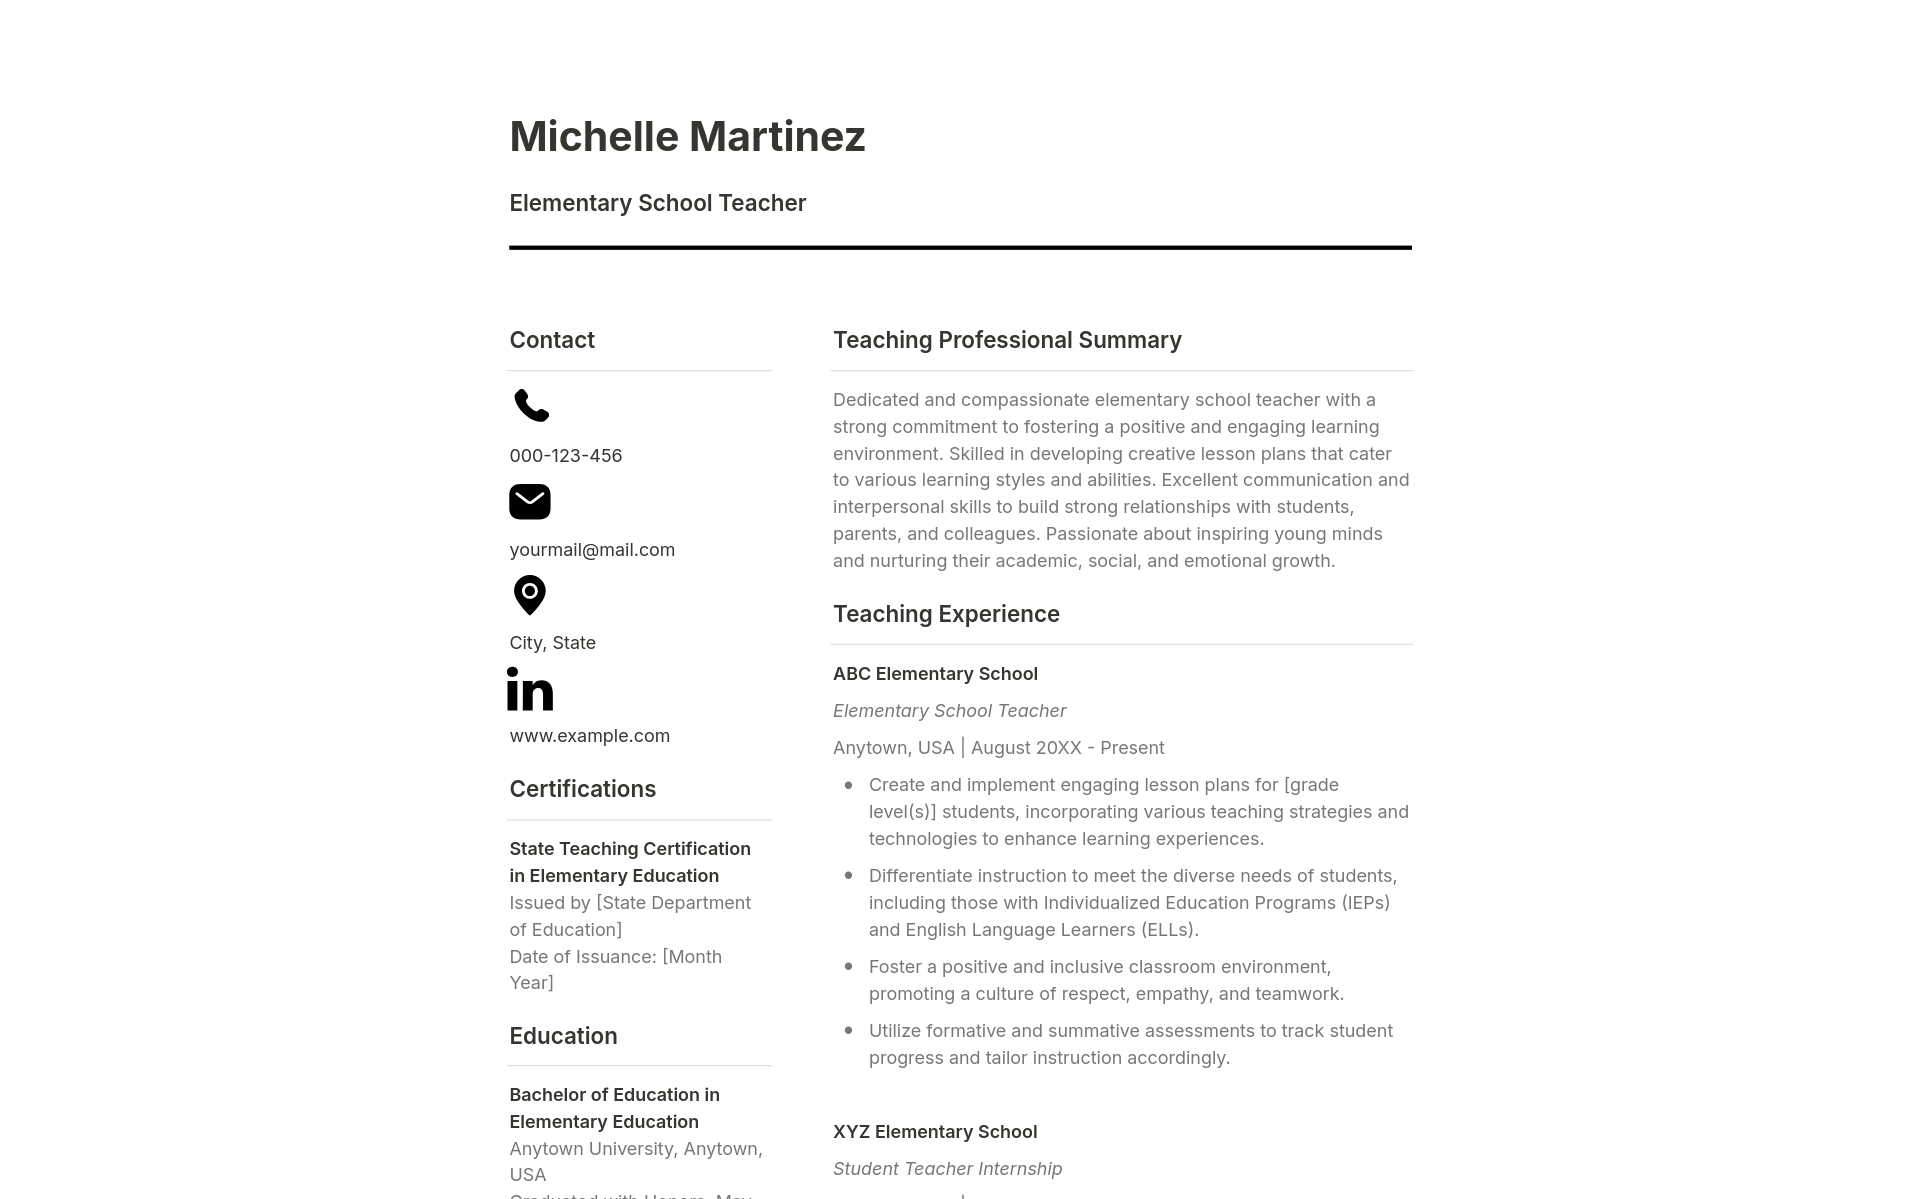 Present your qualifications with timeless elegance using this Monochrome Educator Toolkit featuring a black and white resume, cover letter, and references template. 